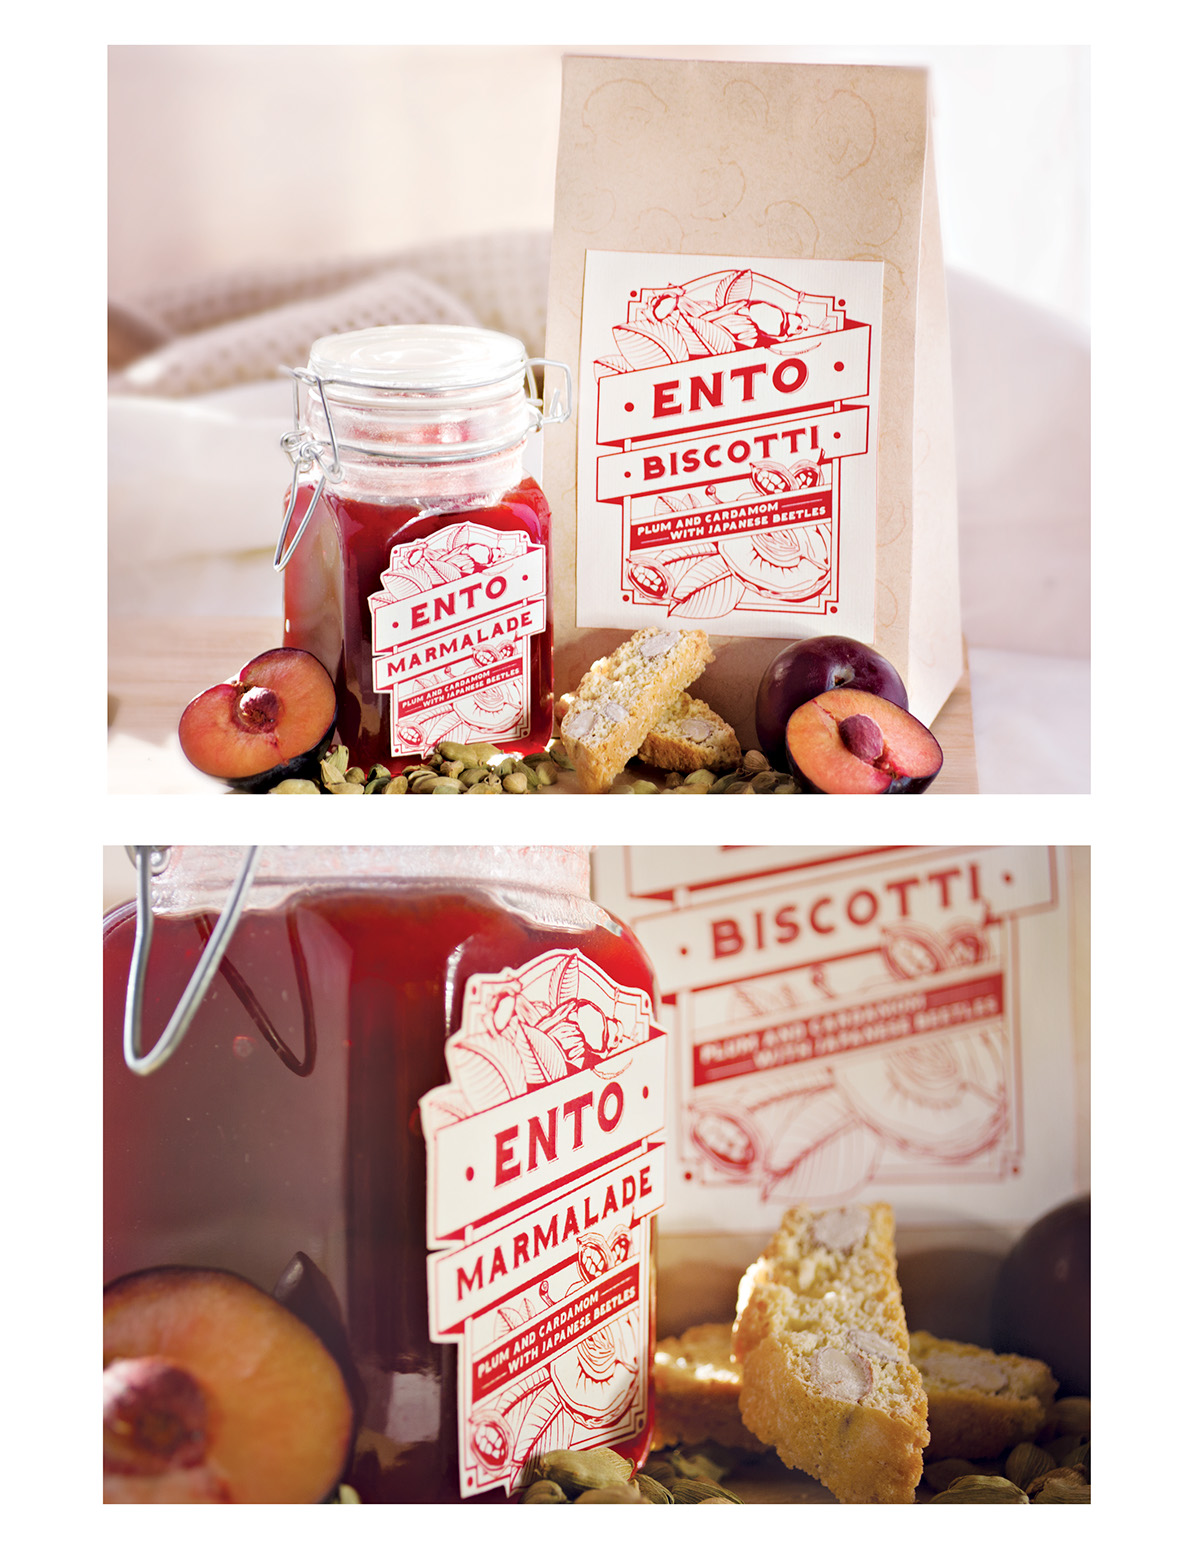 Ento Packaging marmalade Biscotti Insects Food  delicious